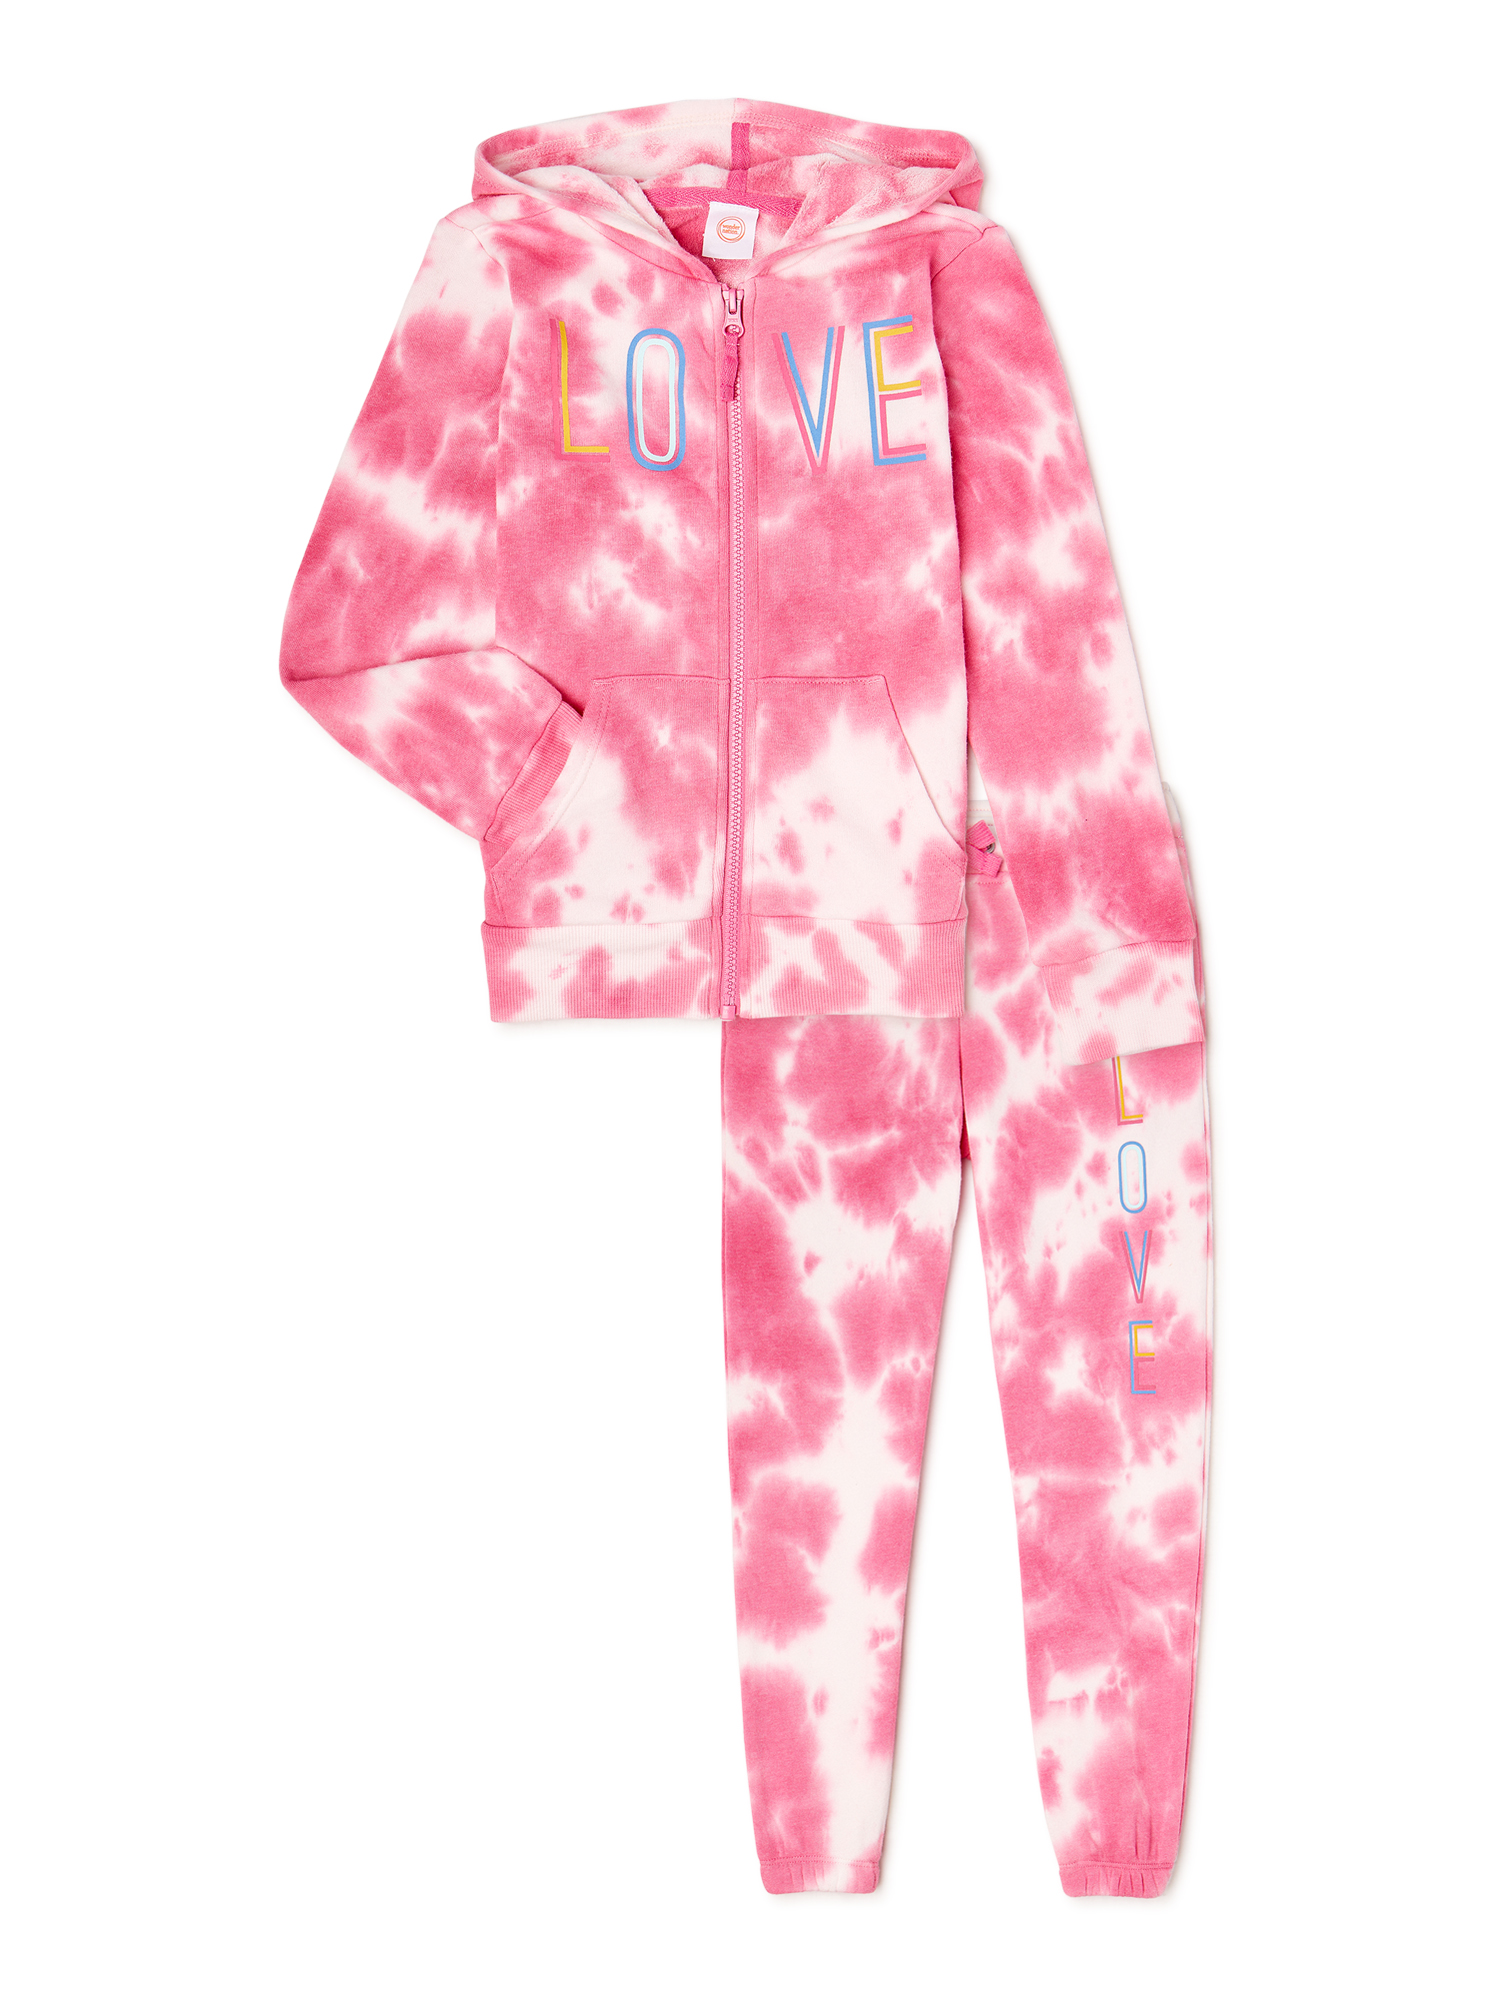 Wonder Nation Girls' Printed Hoodie and Joggers, 2-Piece Outfit Set, Sizes 4-18 & Plus - image 1 of 3